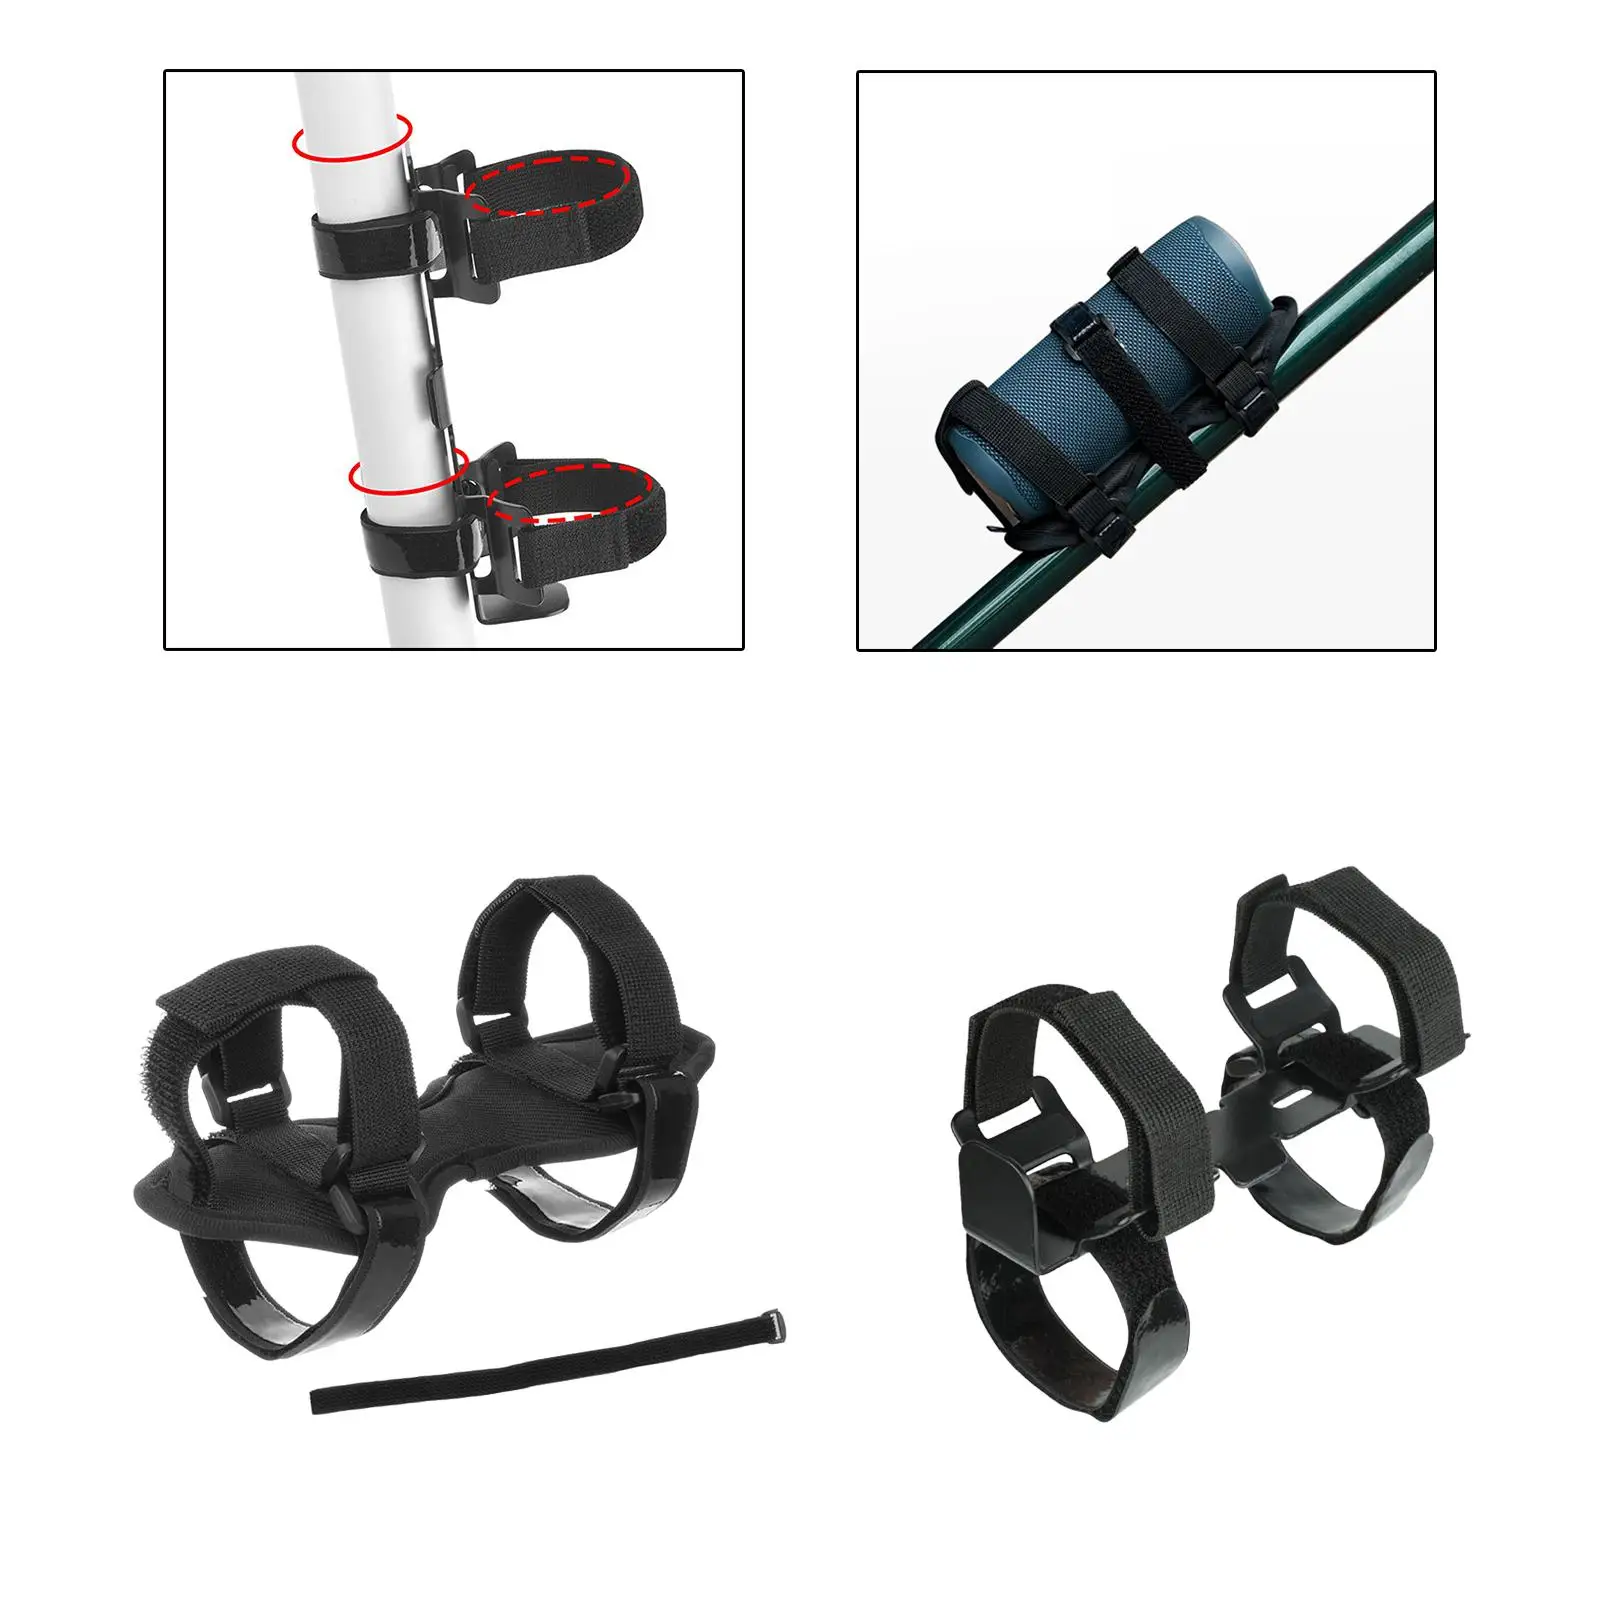 Universal Bicycle Portable Speaker Mount Motorbike Bottles Bracket Lightweight Rack Road for Bicycle Accessories Attachment